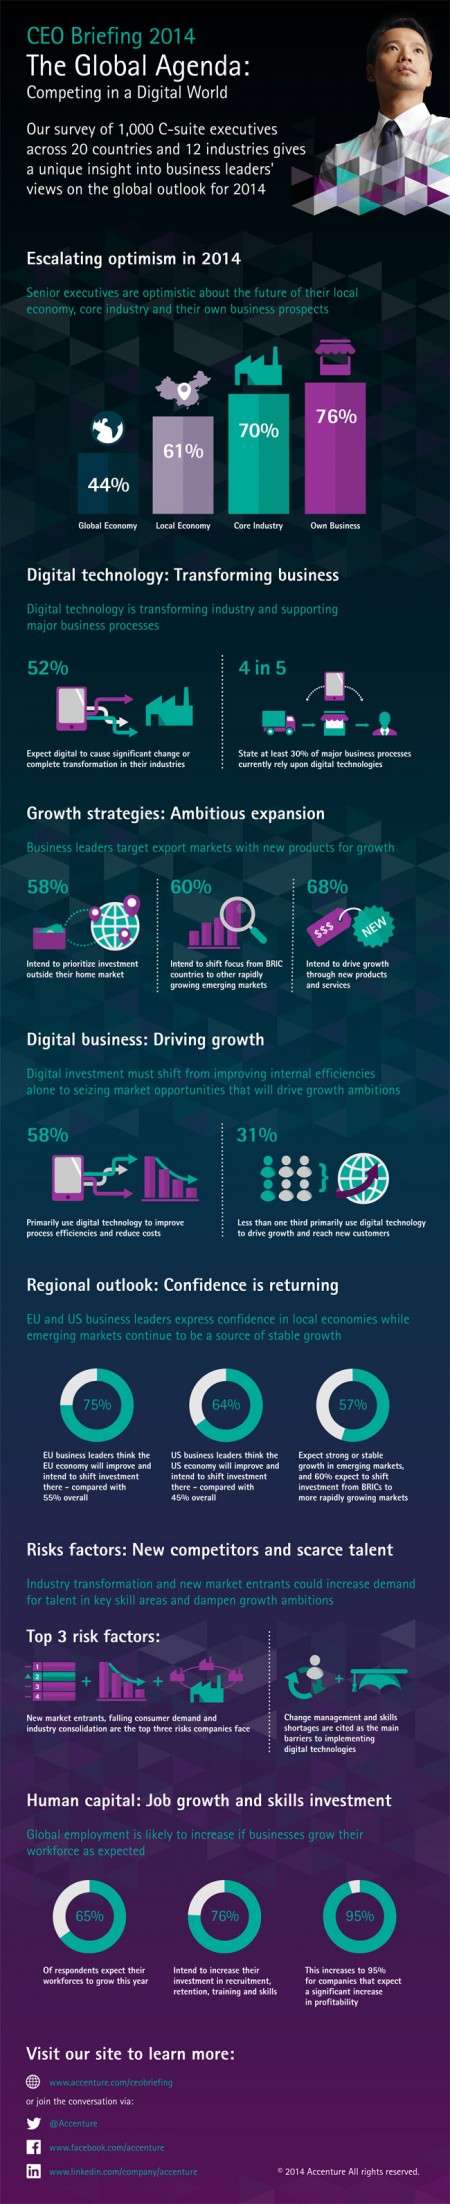 16 Accenture-Global-Agenda-CEO-Briefing-2014-Competing-Digital-World-Infographic-v2